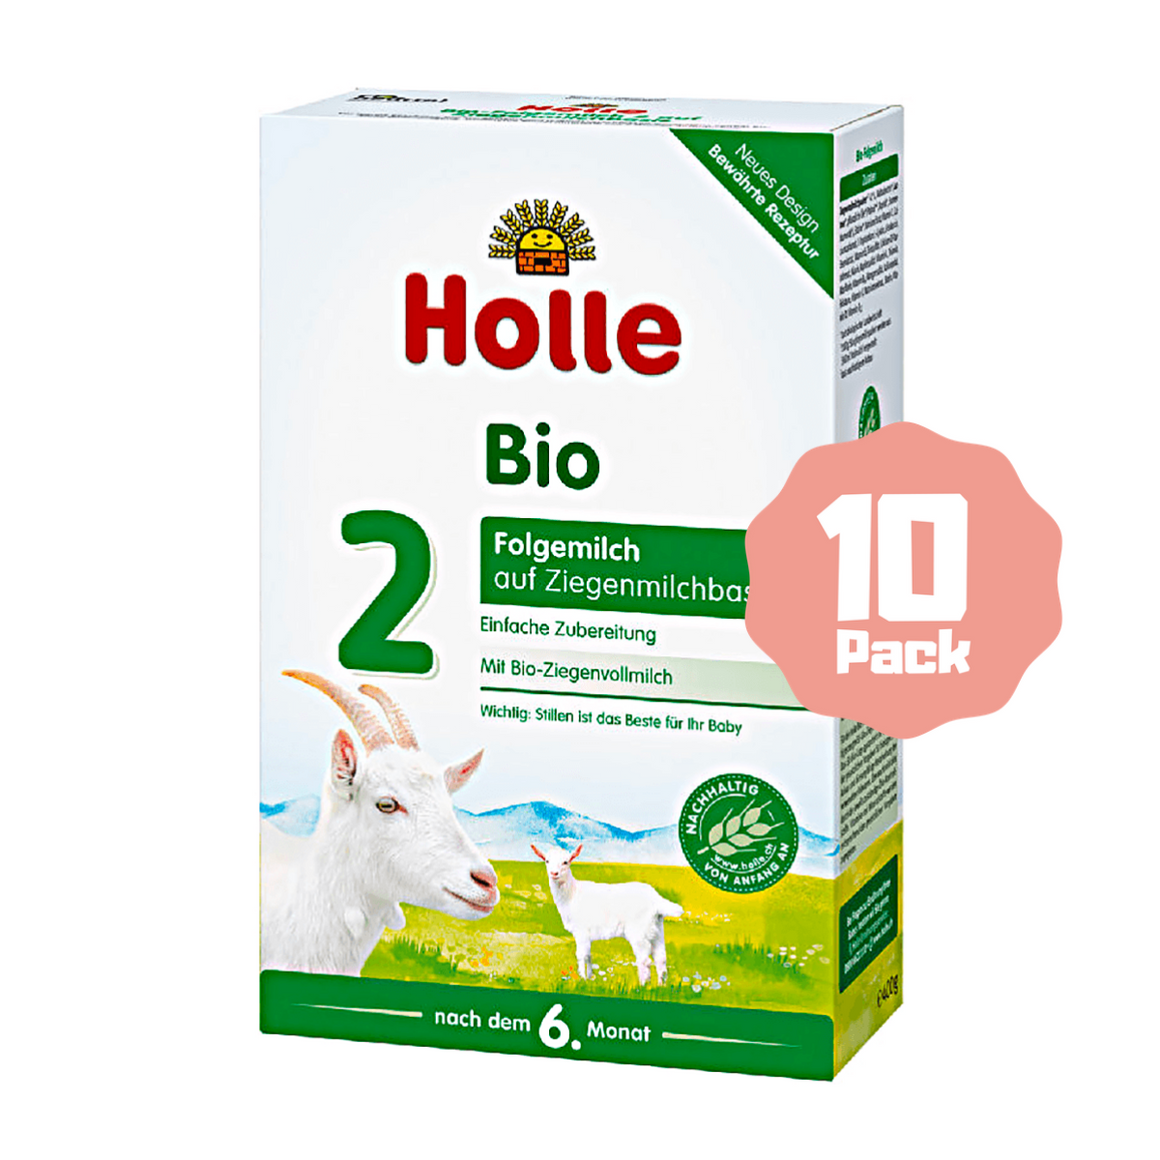 Holle Stage 2 Organic Follow-on Infant Goat Milk Formula (6 Months+) (10 Pack)